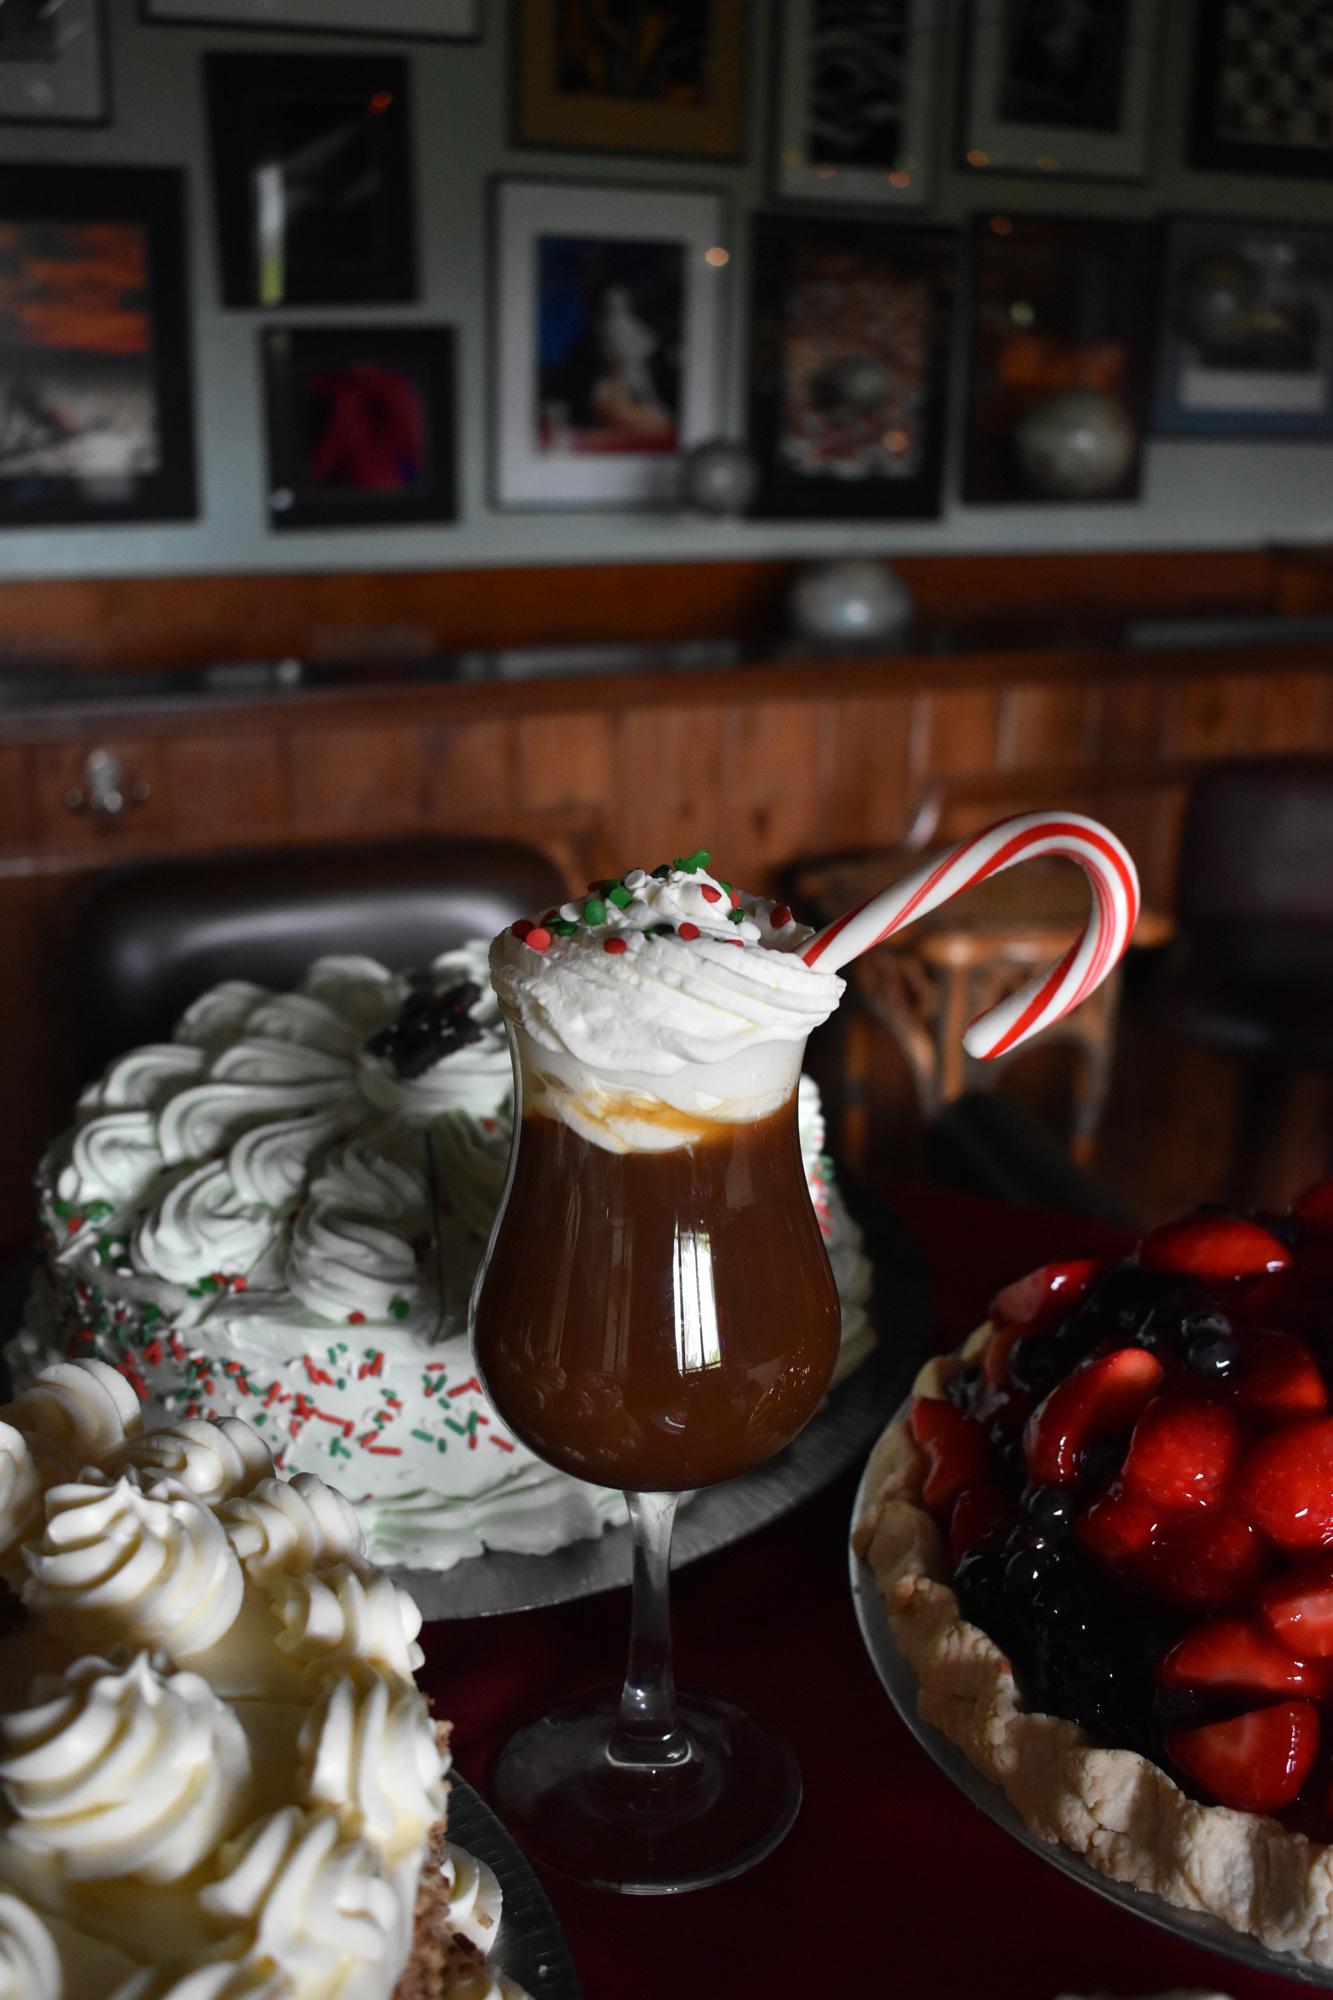 Euphemia Haye has an extensive holiday dessert bar including several pies and a festive chocolate mousse with fresh whipped cream. Photo by Niki Kottmann